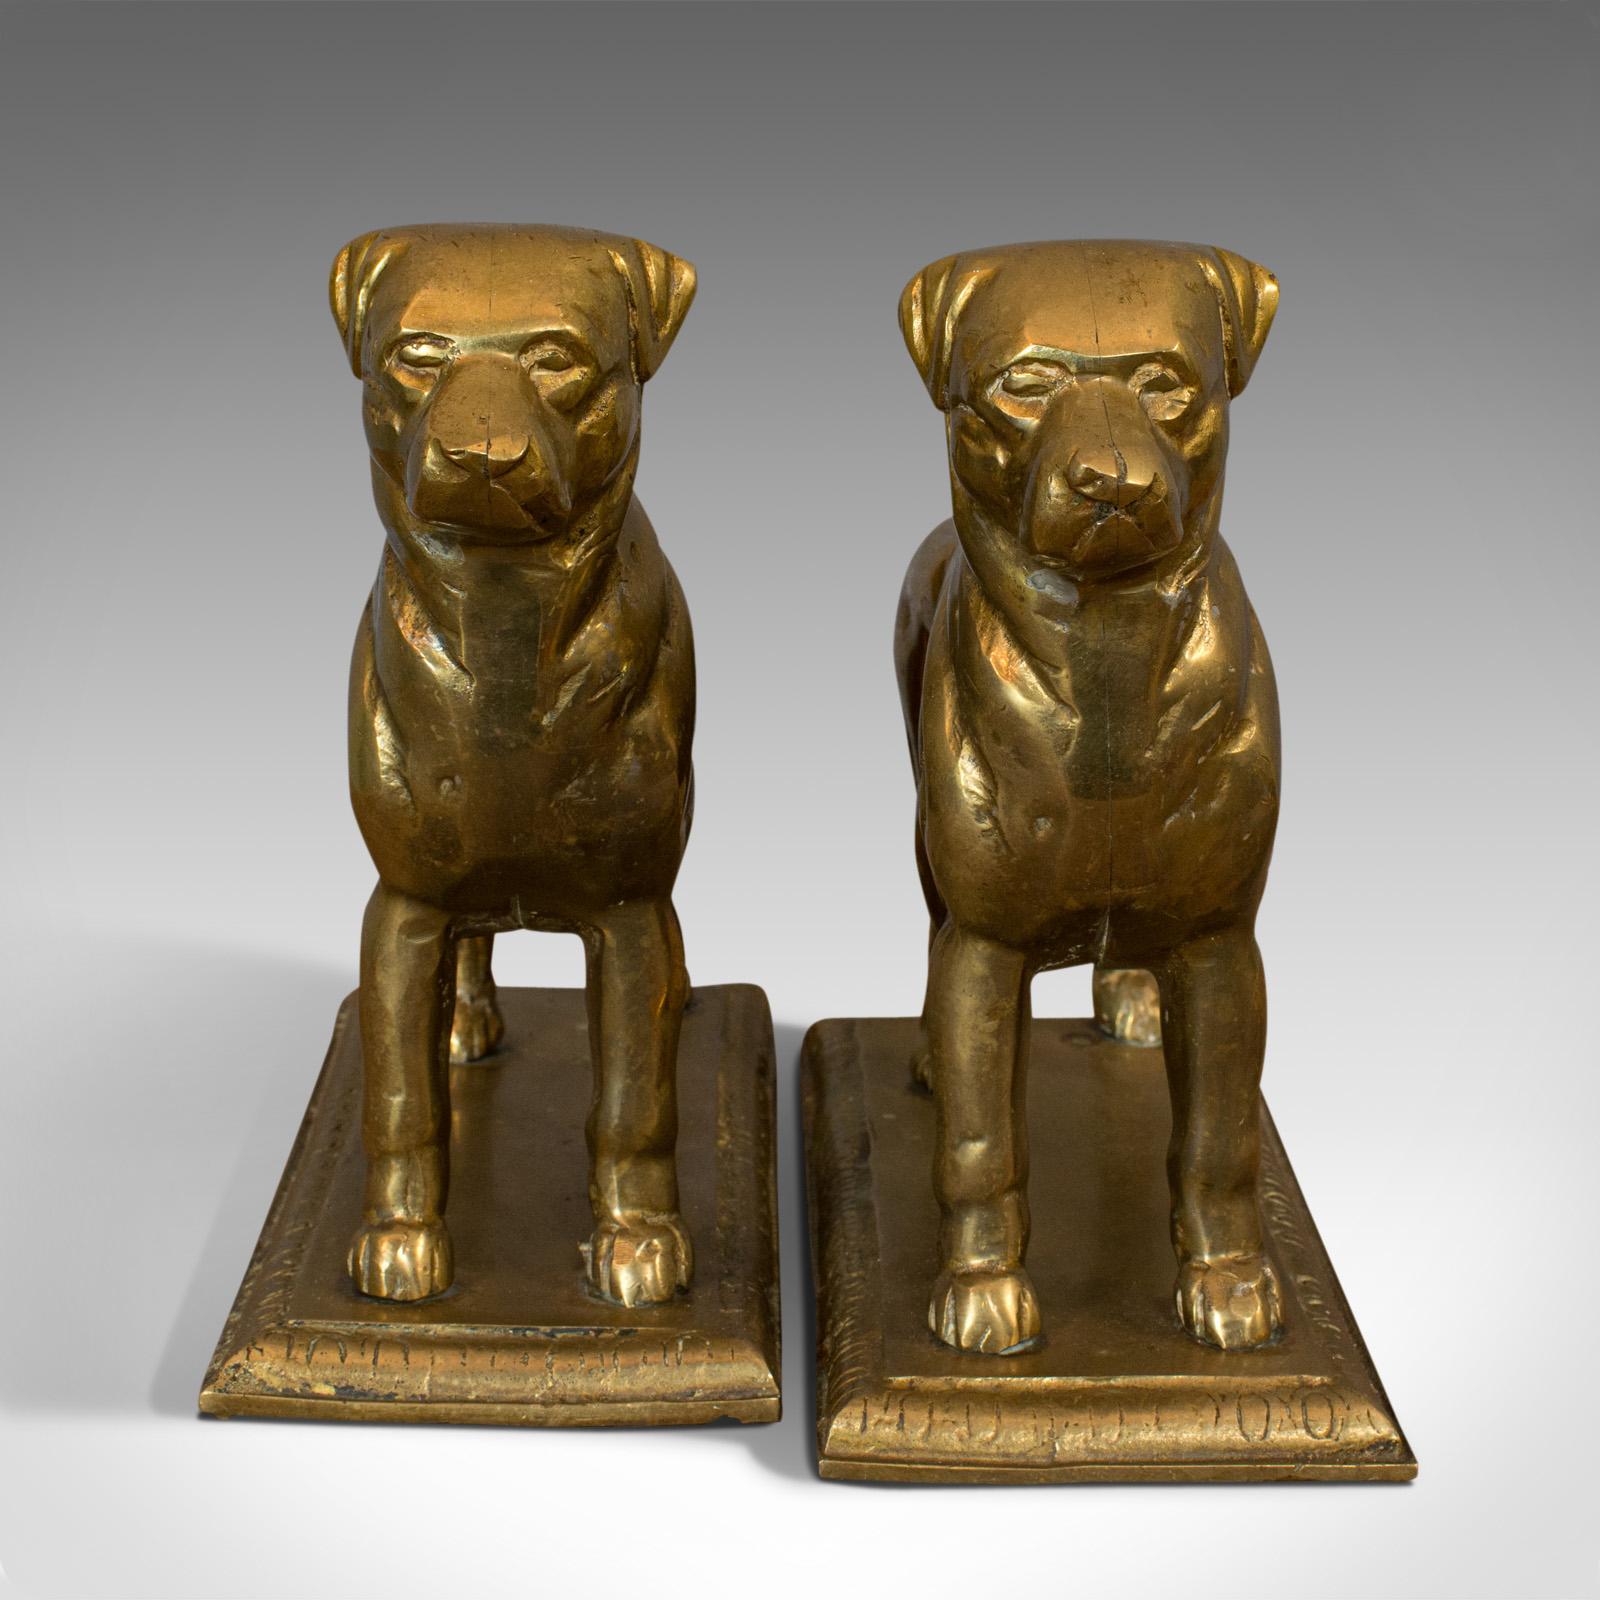 This is a vintage pair of decorative dogs. An English, cast gilt metal figure of a Rottweiler well suited as doorstops or at the fireside, dating to the mid-20th century, circa 1950.

Appealing, versatile pair of vintage dogs
Displaying a